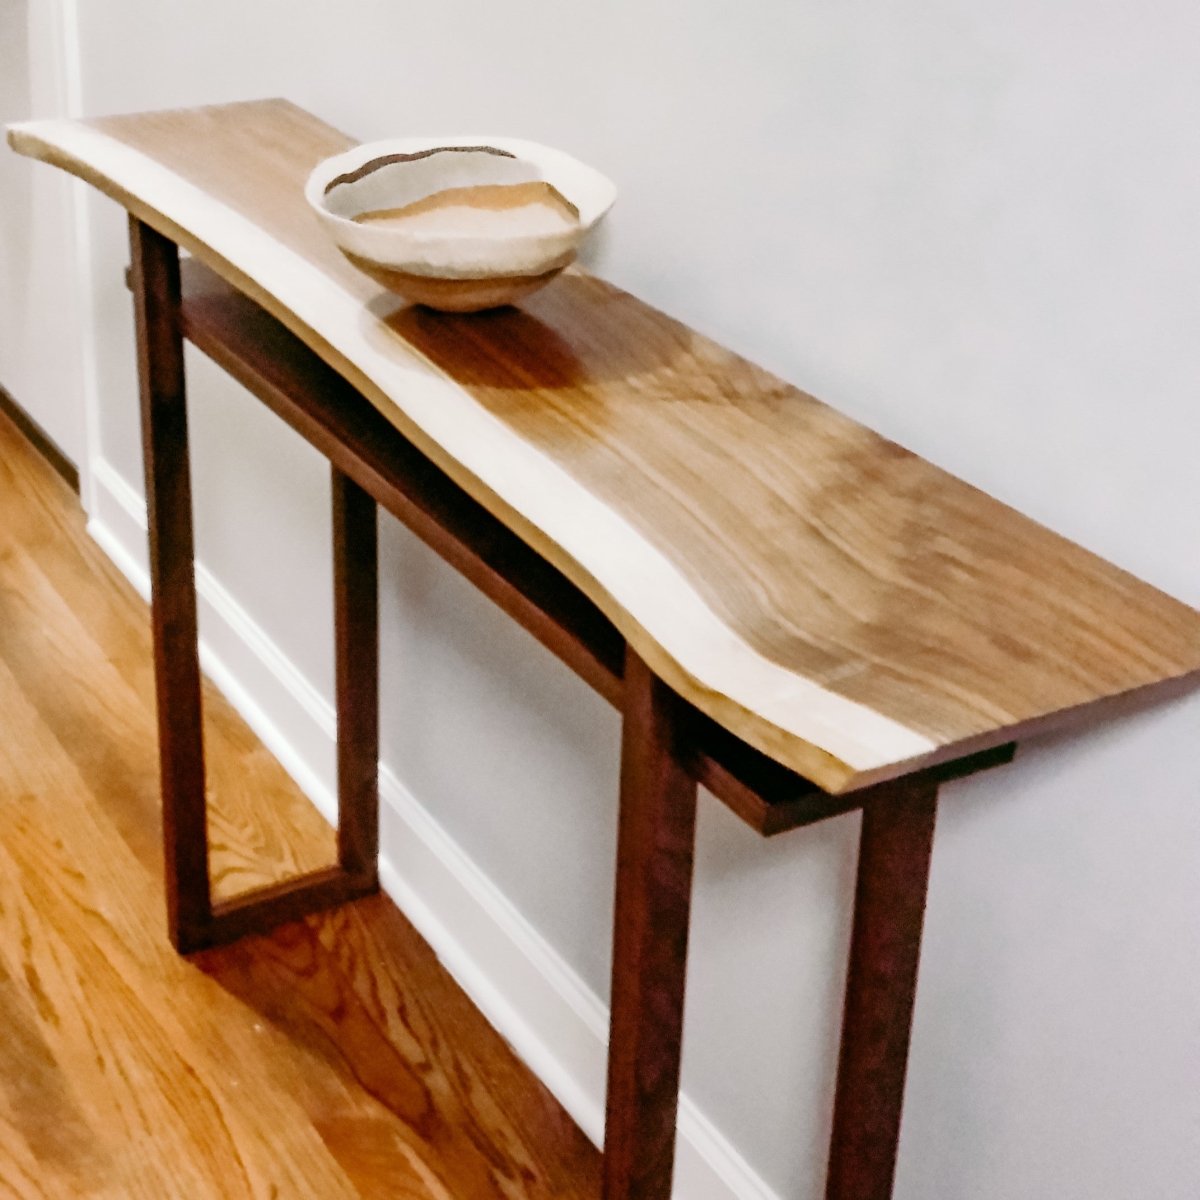 Create a Custom Statement Entry Table- tall or small, narrow & modern